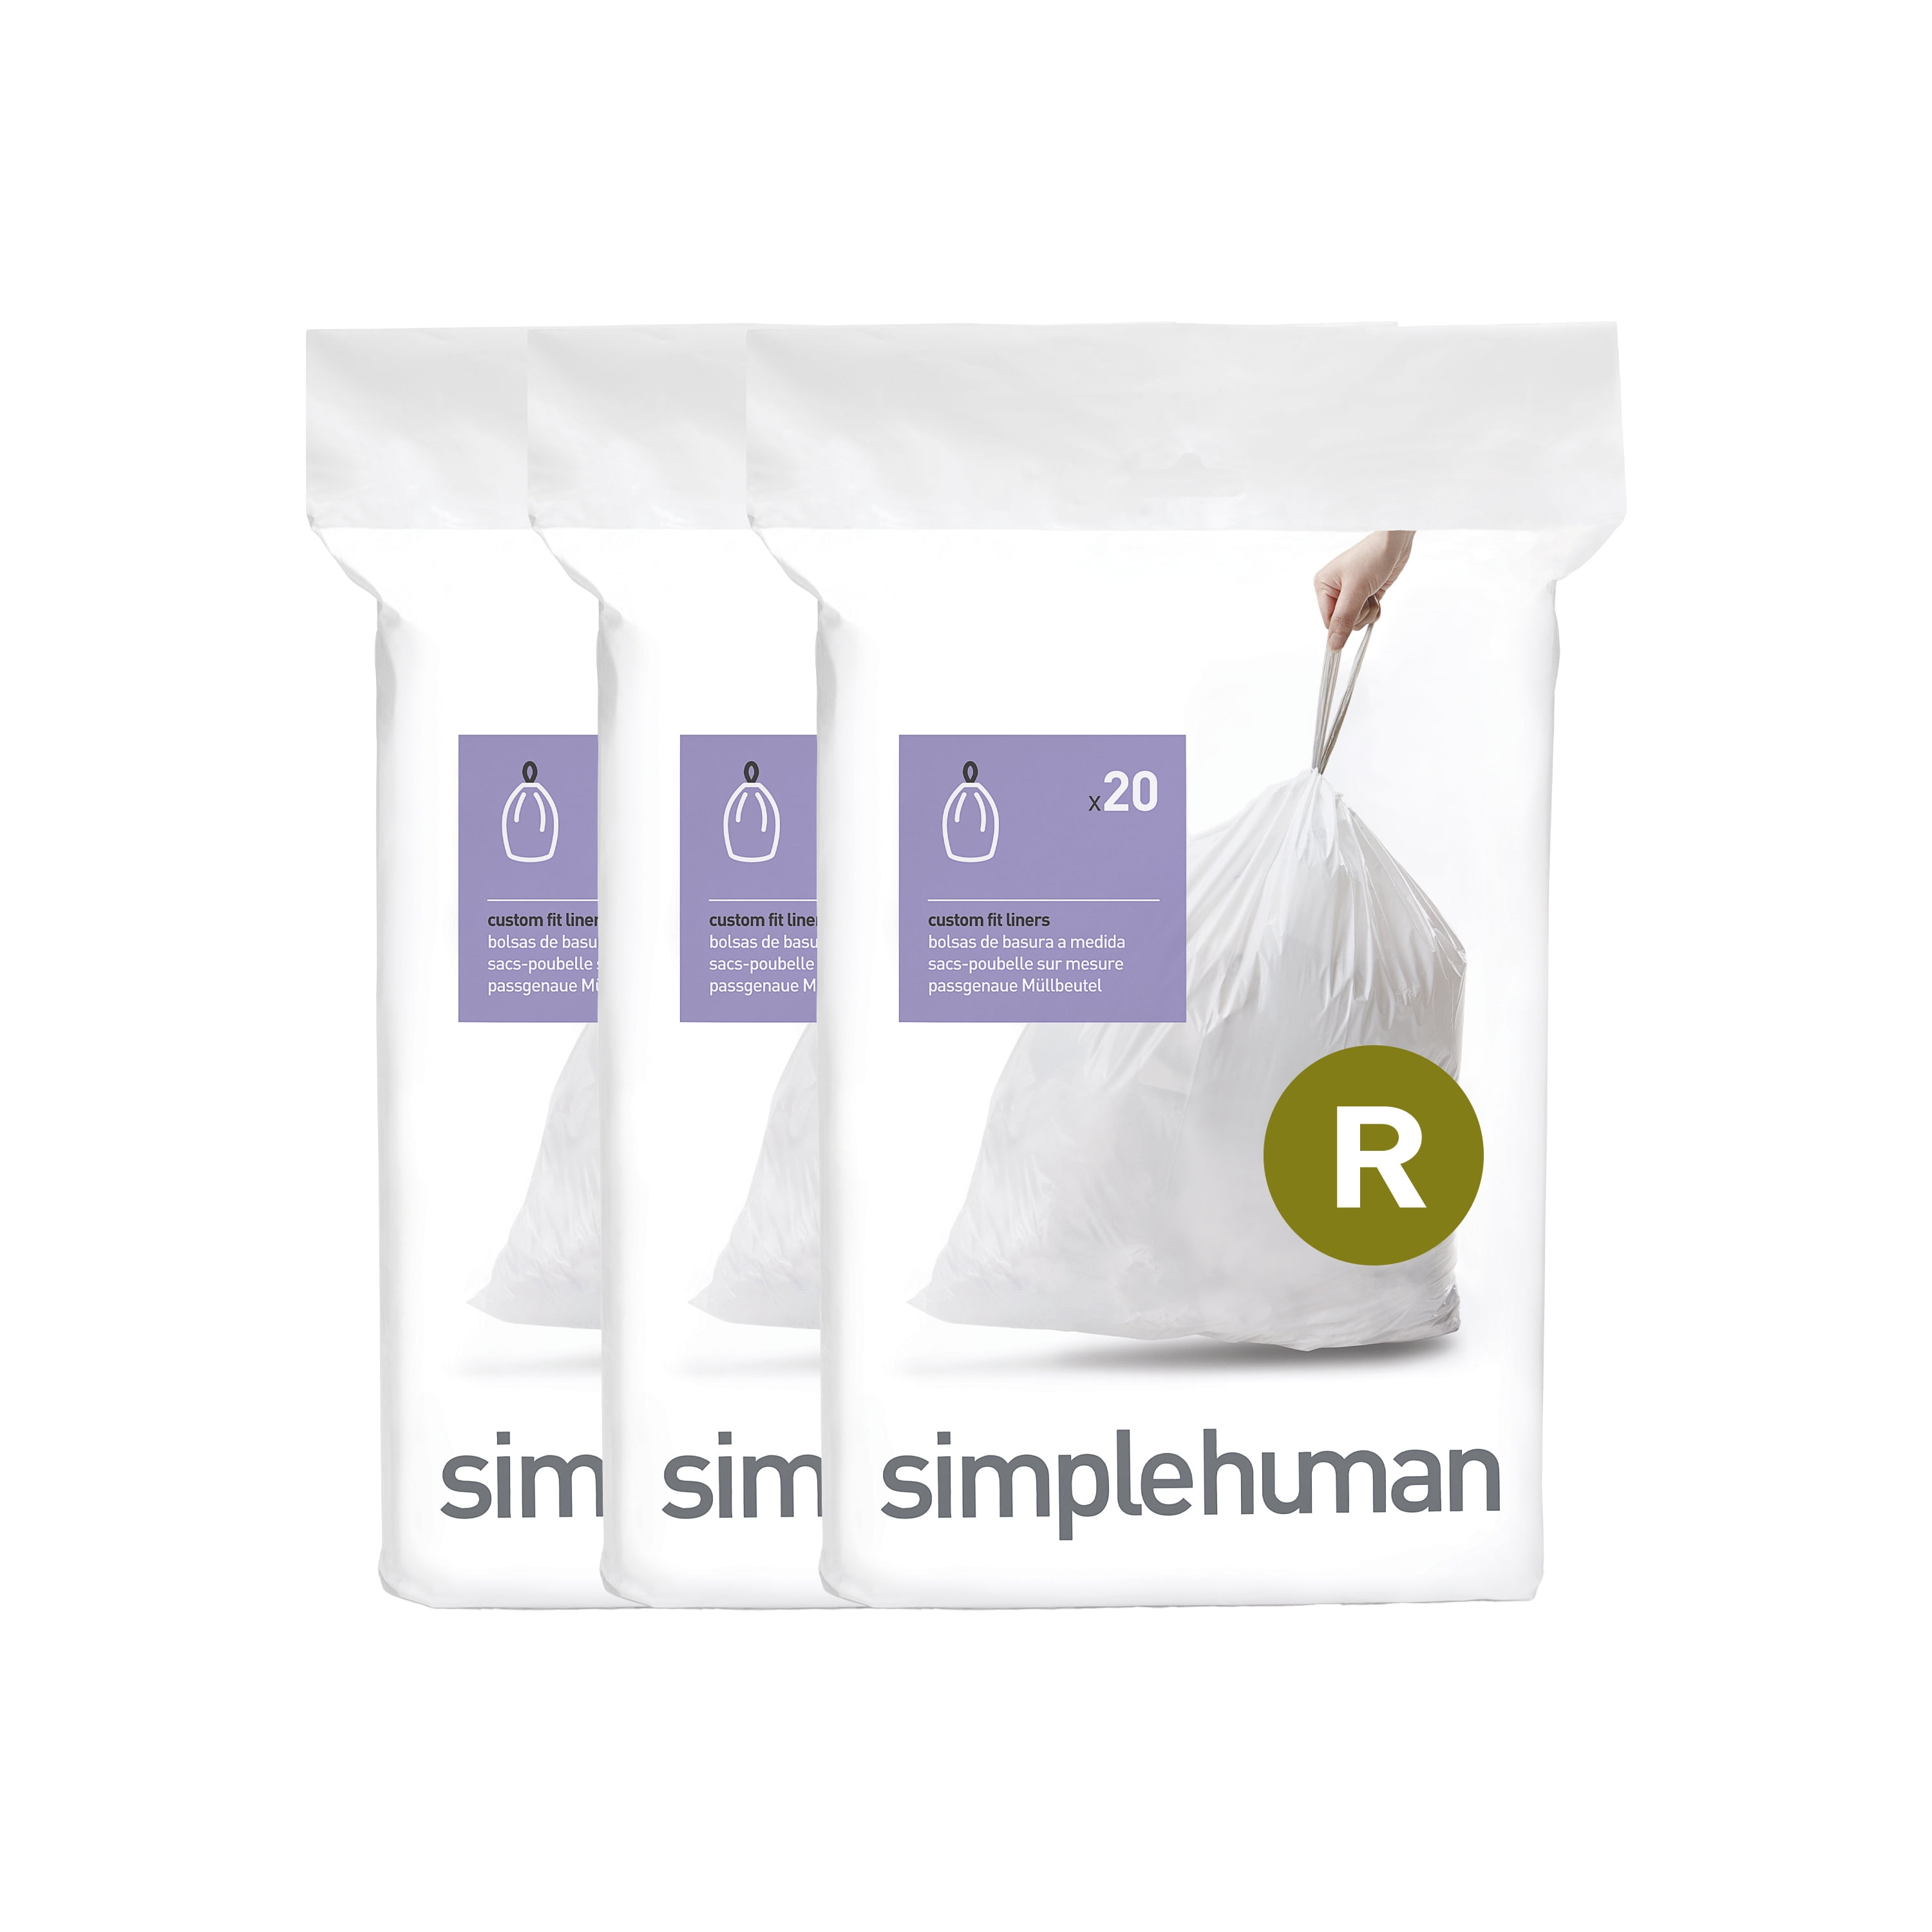  simplehuman Code N Trash Bags, 60 Liners, White, Count